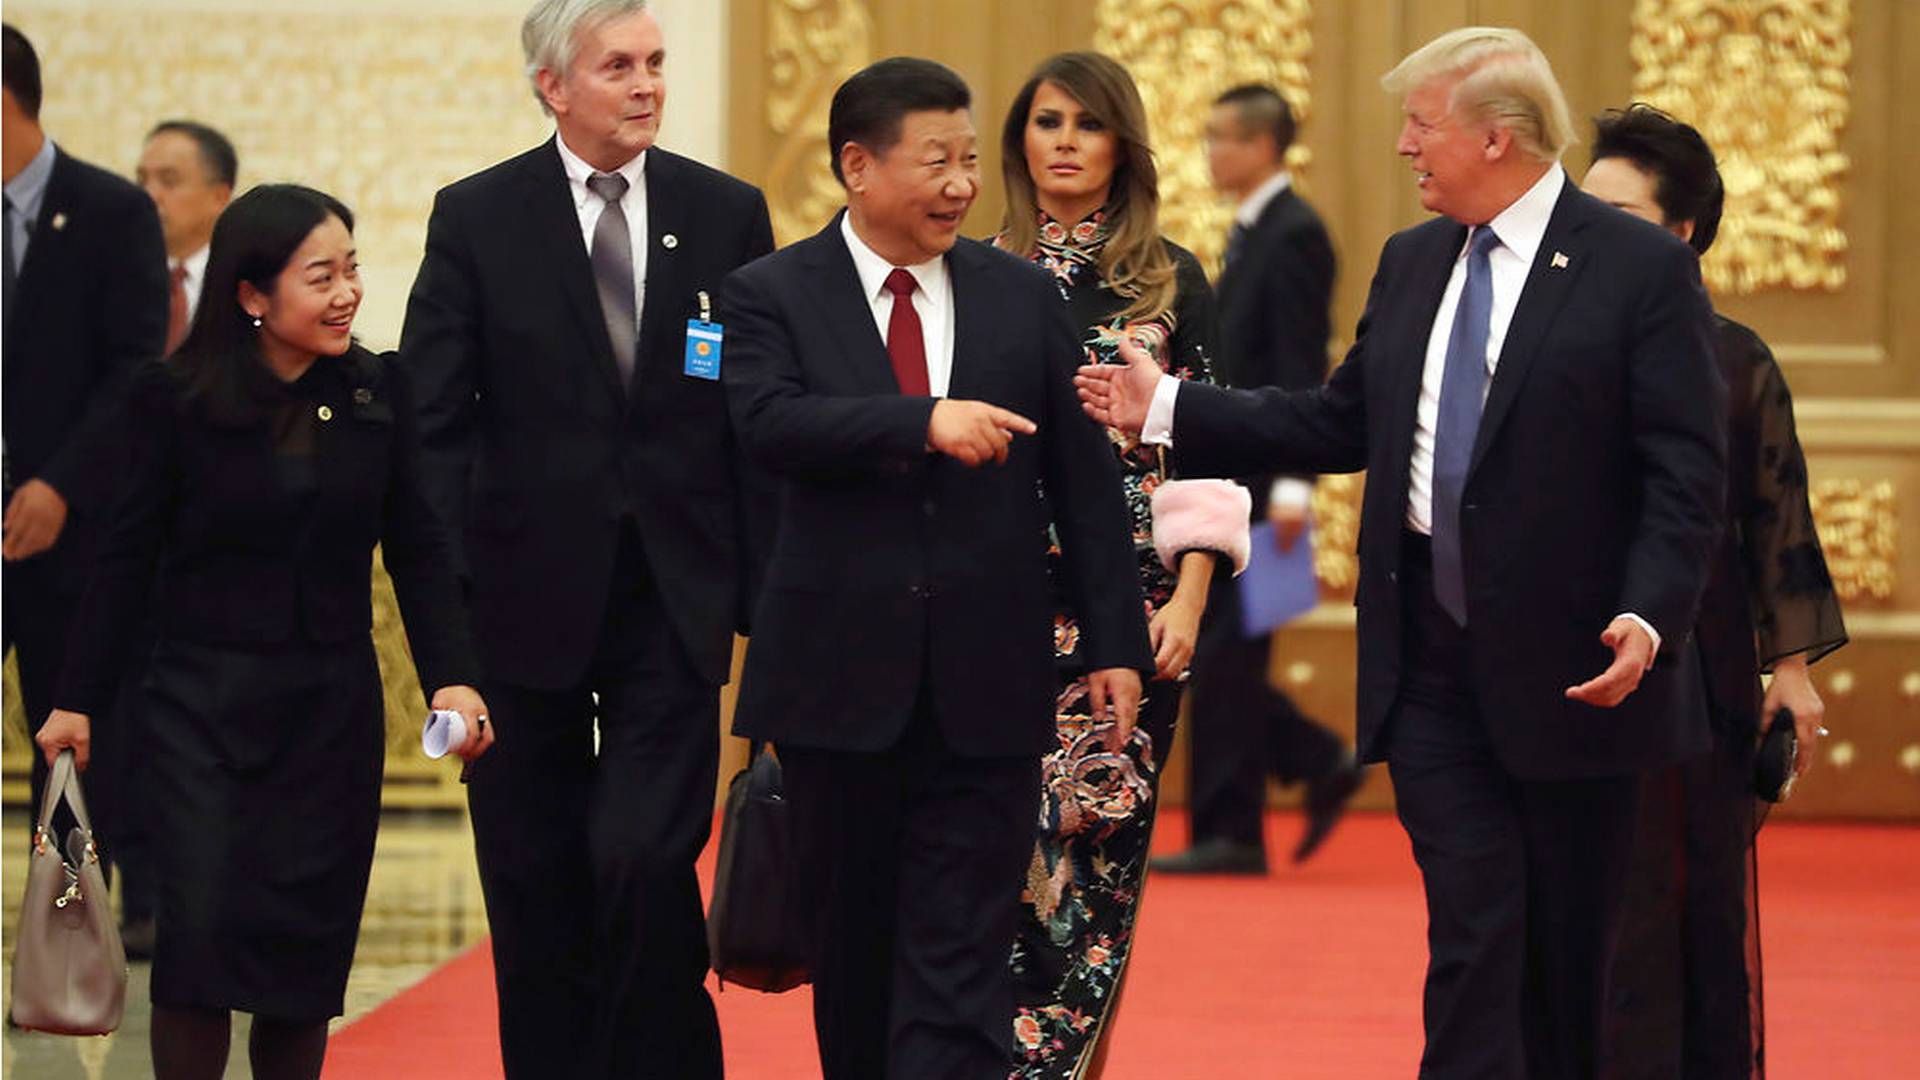 US President Donald Trump with Chinese President Xi Jinping at a dinner in Beijing in November 2017. | Photo: Ritzau Scanpix/Andrew Harnik